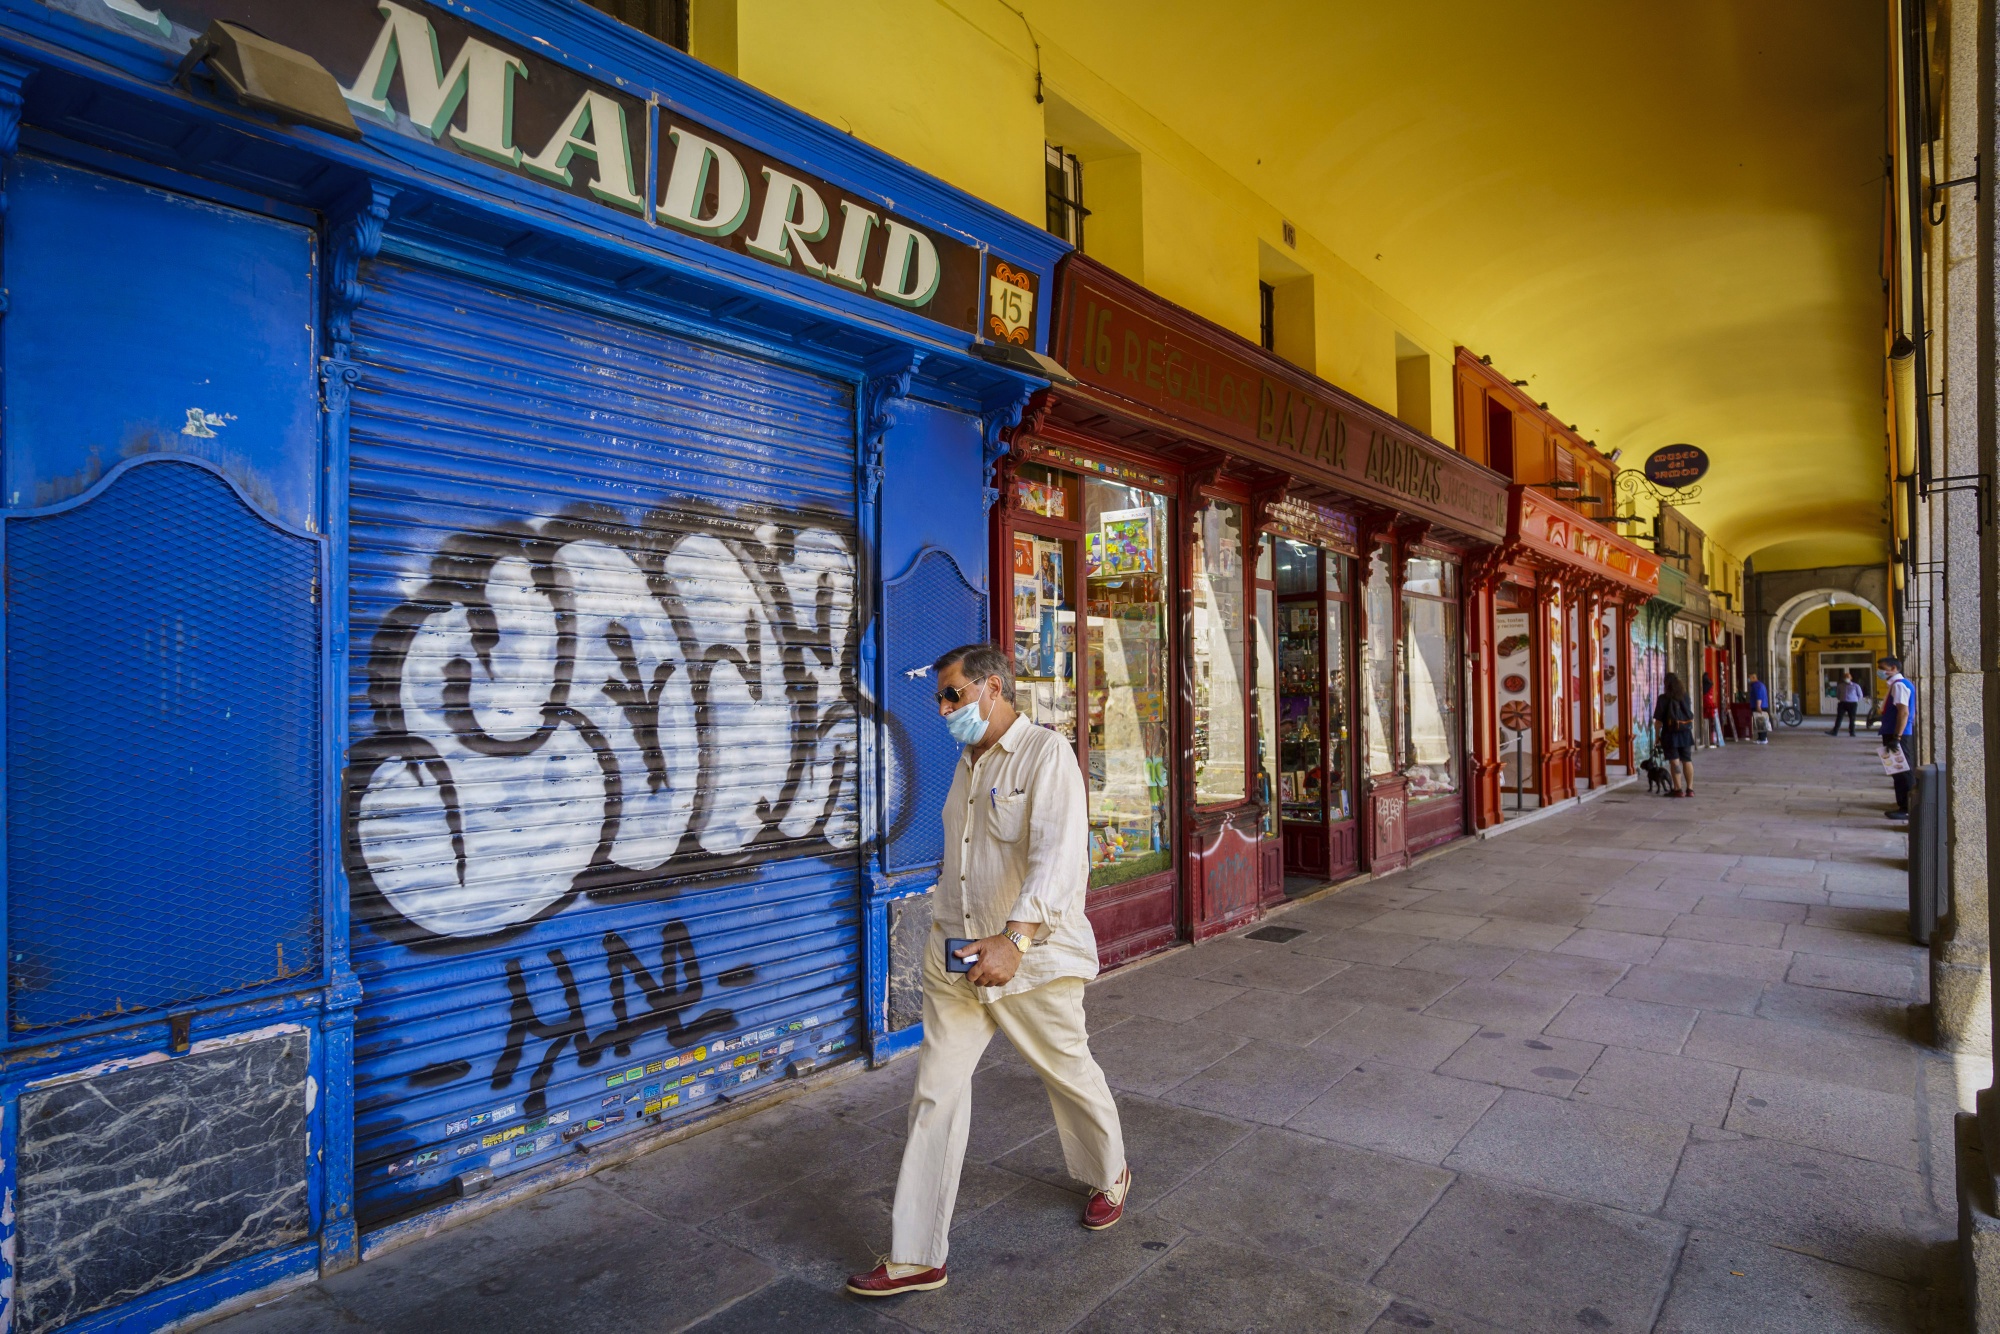 A pedestrian passes a shuttered business in Madrid, Spain.